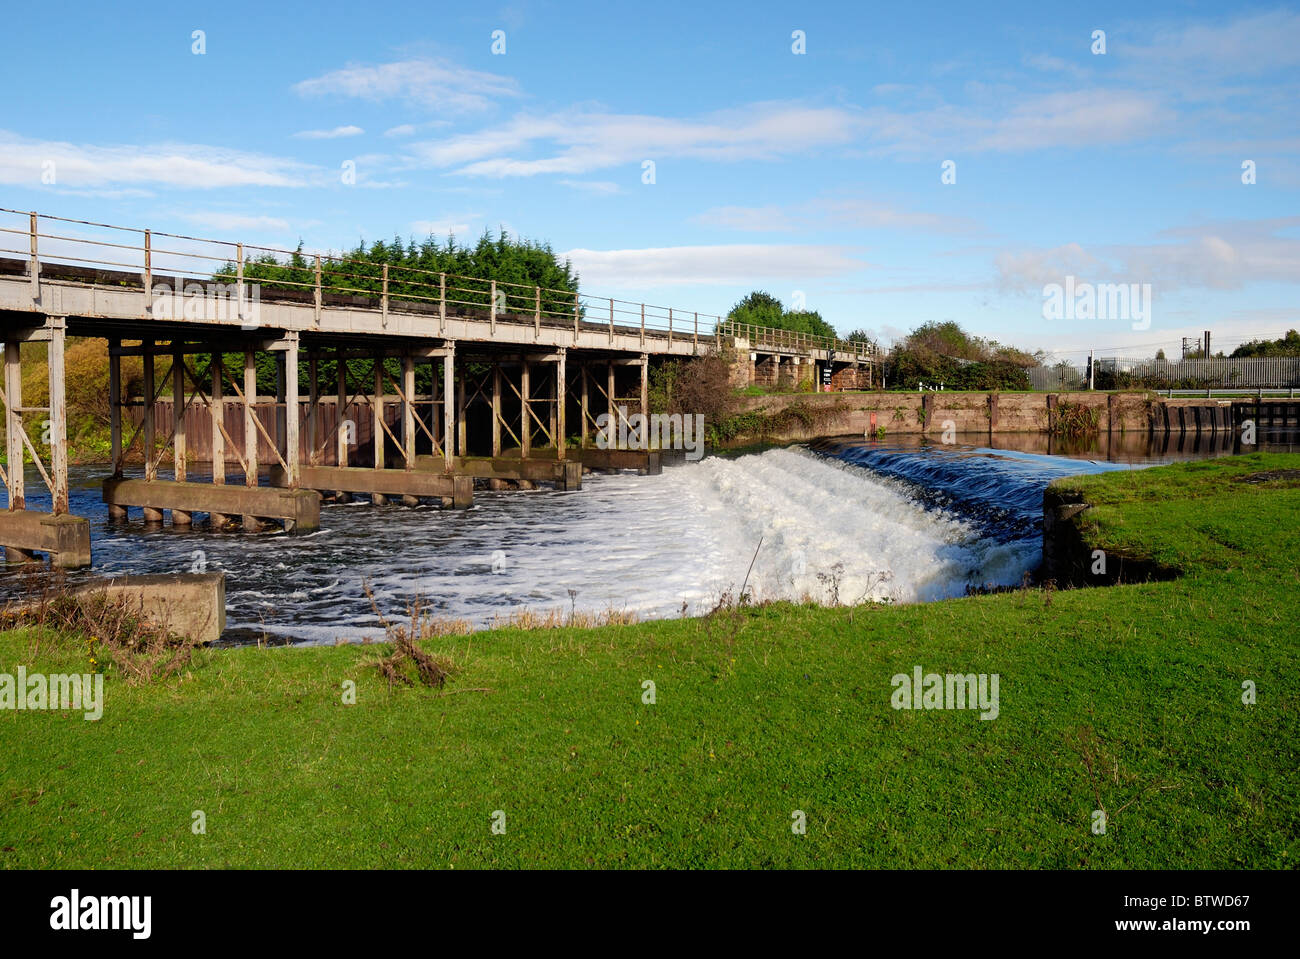 Nether bloccare weir NEWARK ON TRENT nottinghamshire England Regno Unito Foto Stock